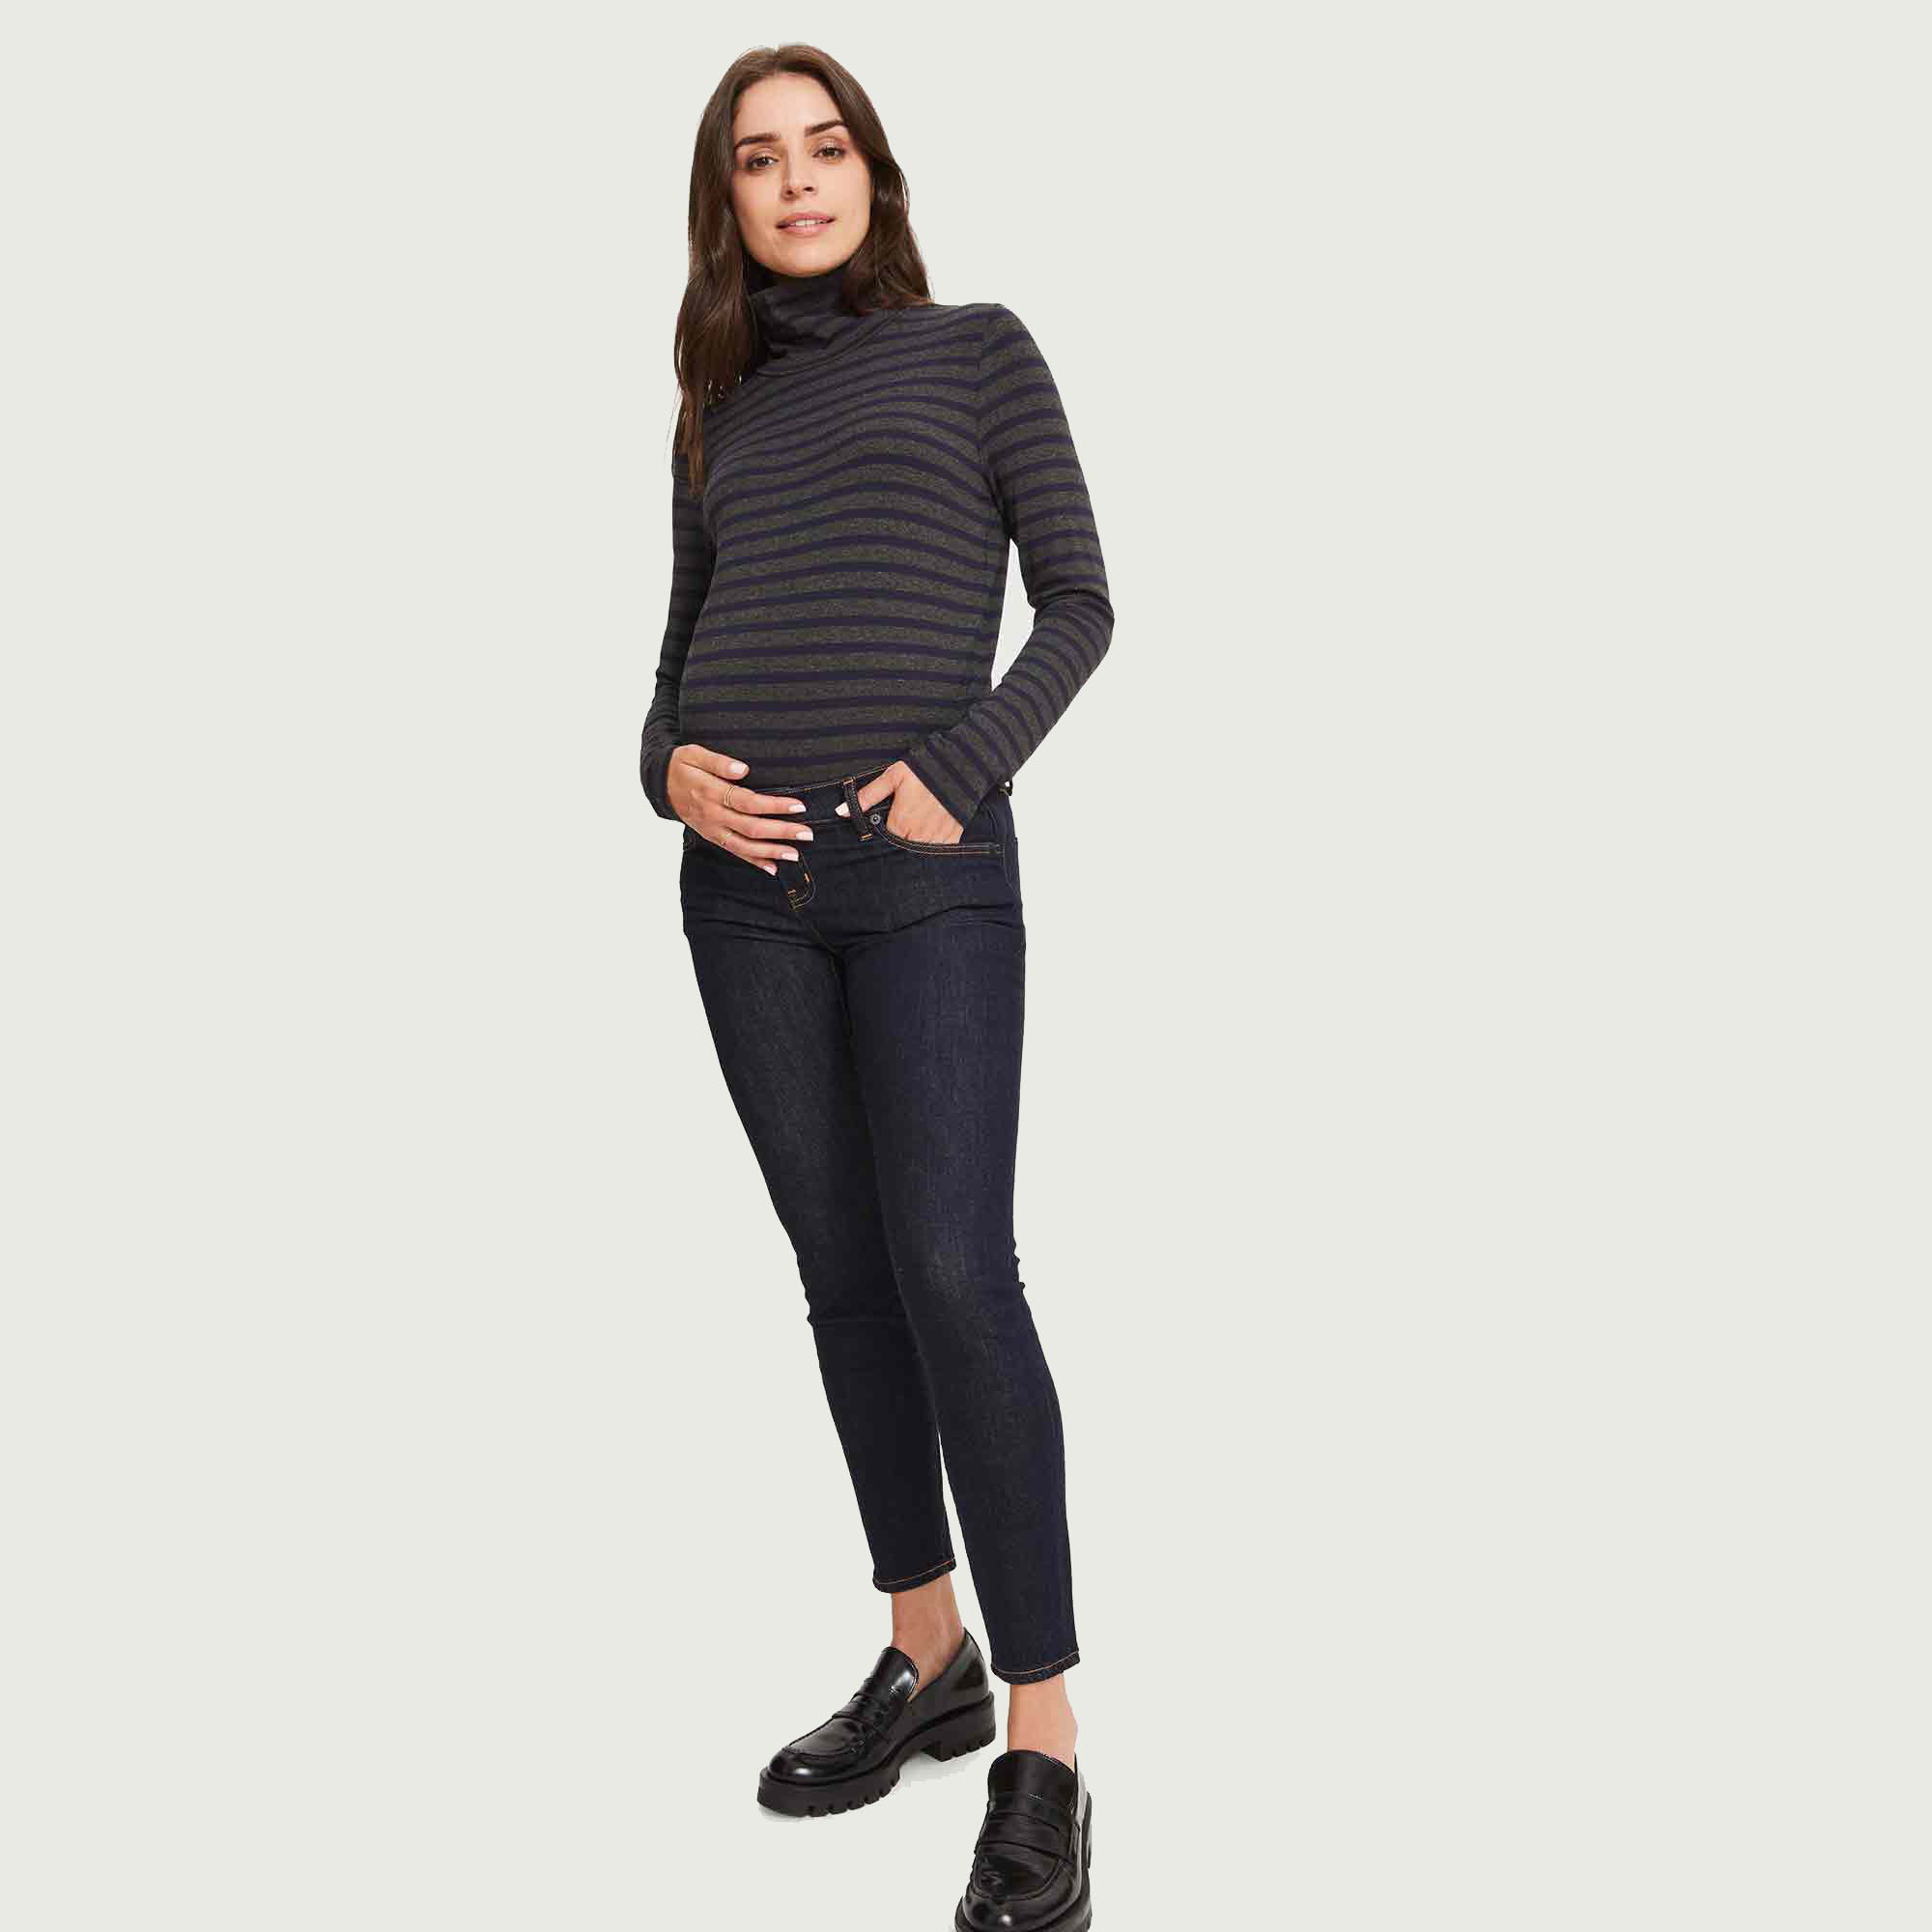 Model in black slim fit maternity jean against a cream background